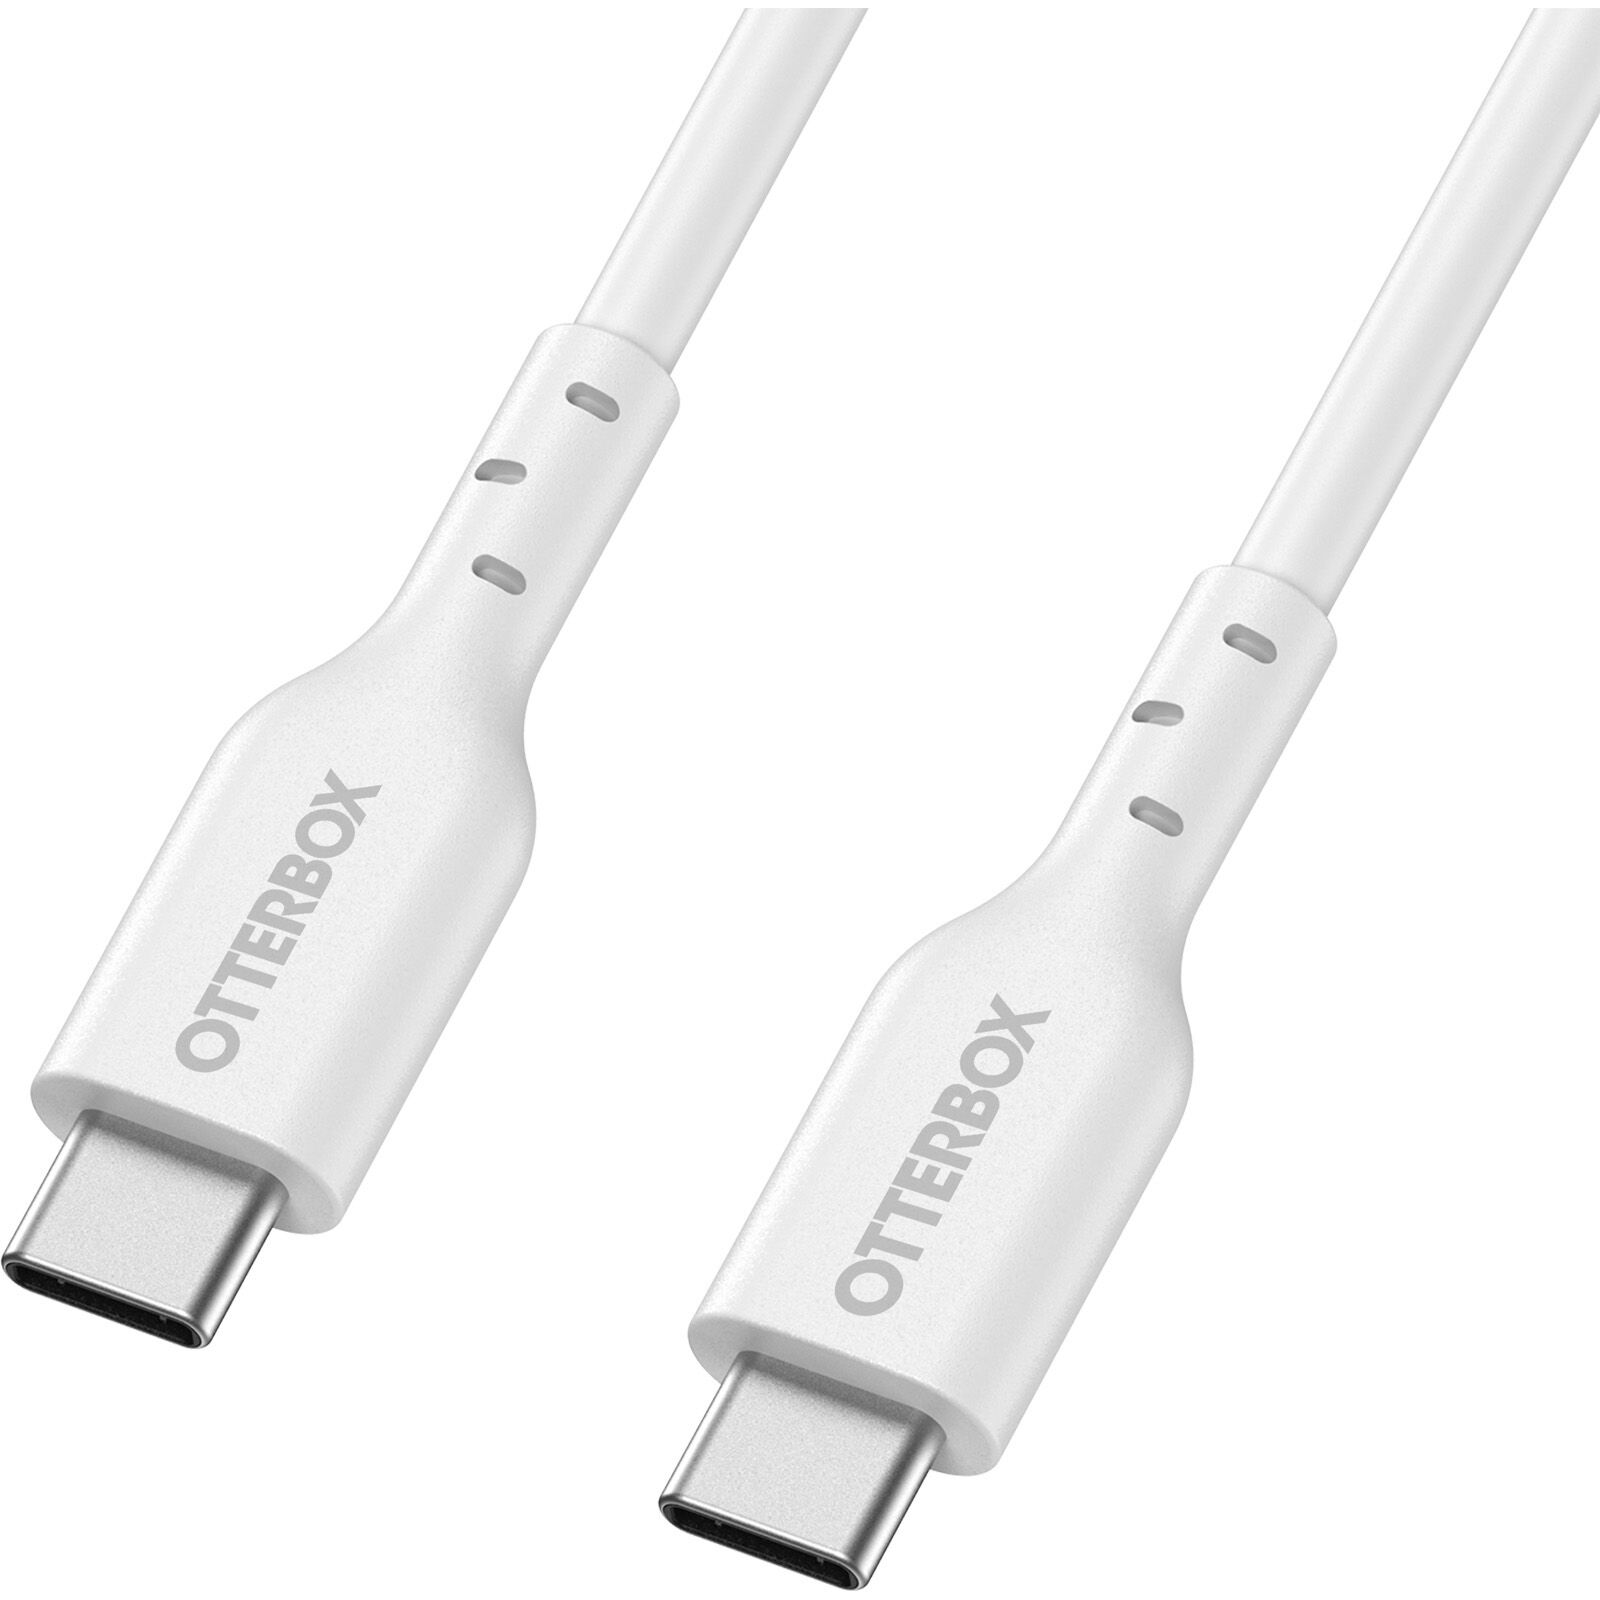 Cable USB-C a USB-C 2 metros Standard Fast Charge blanco